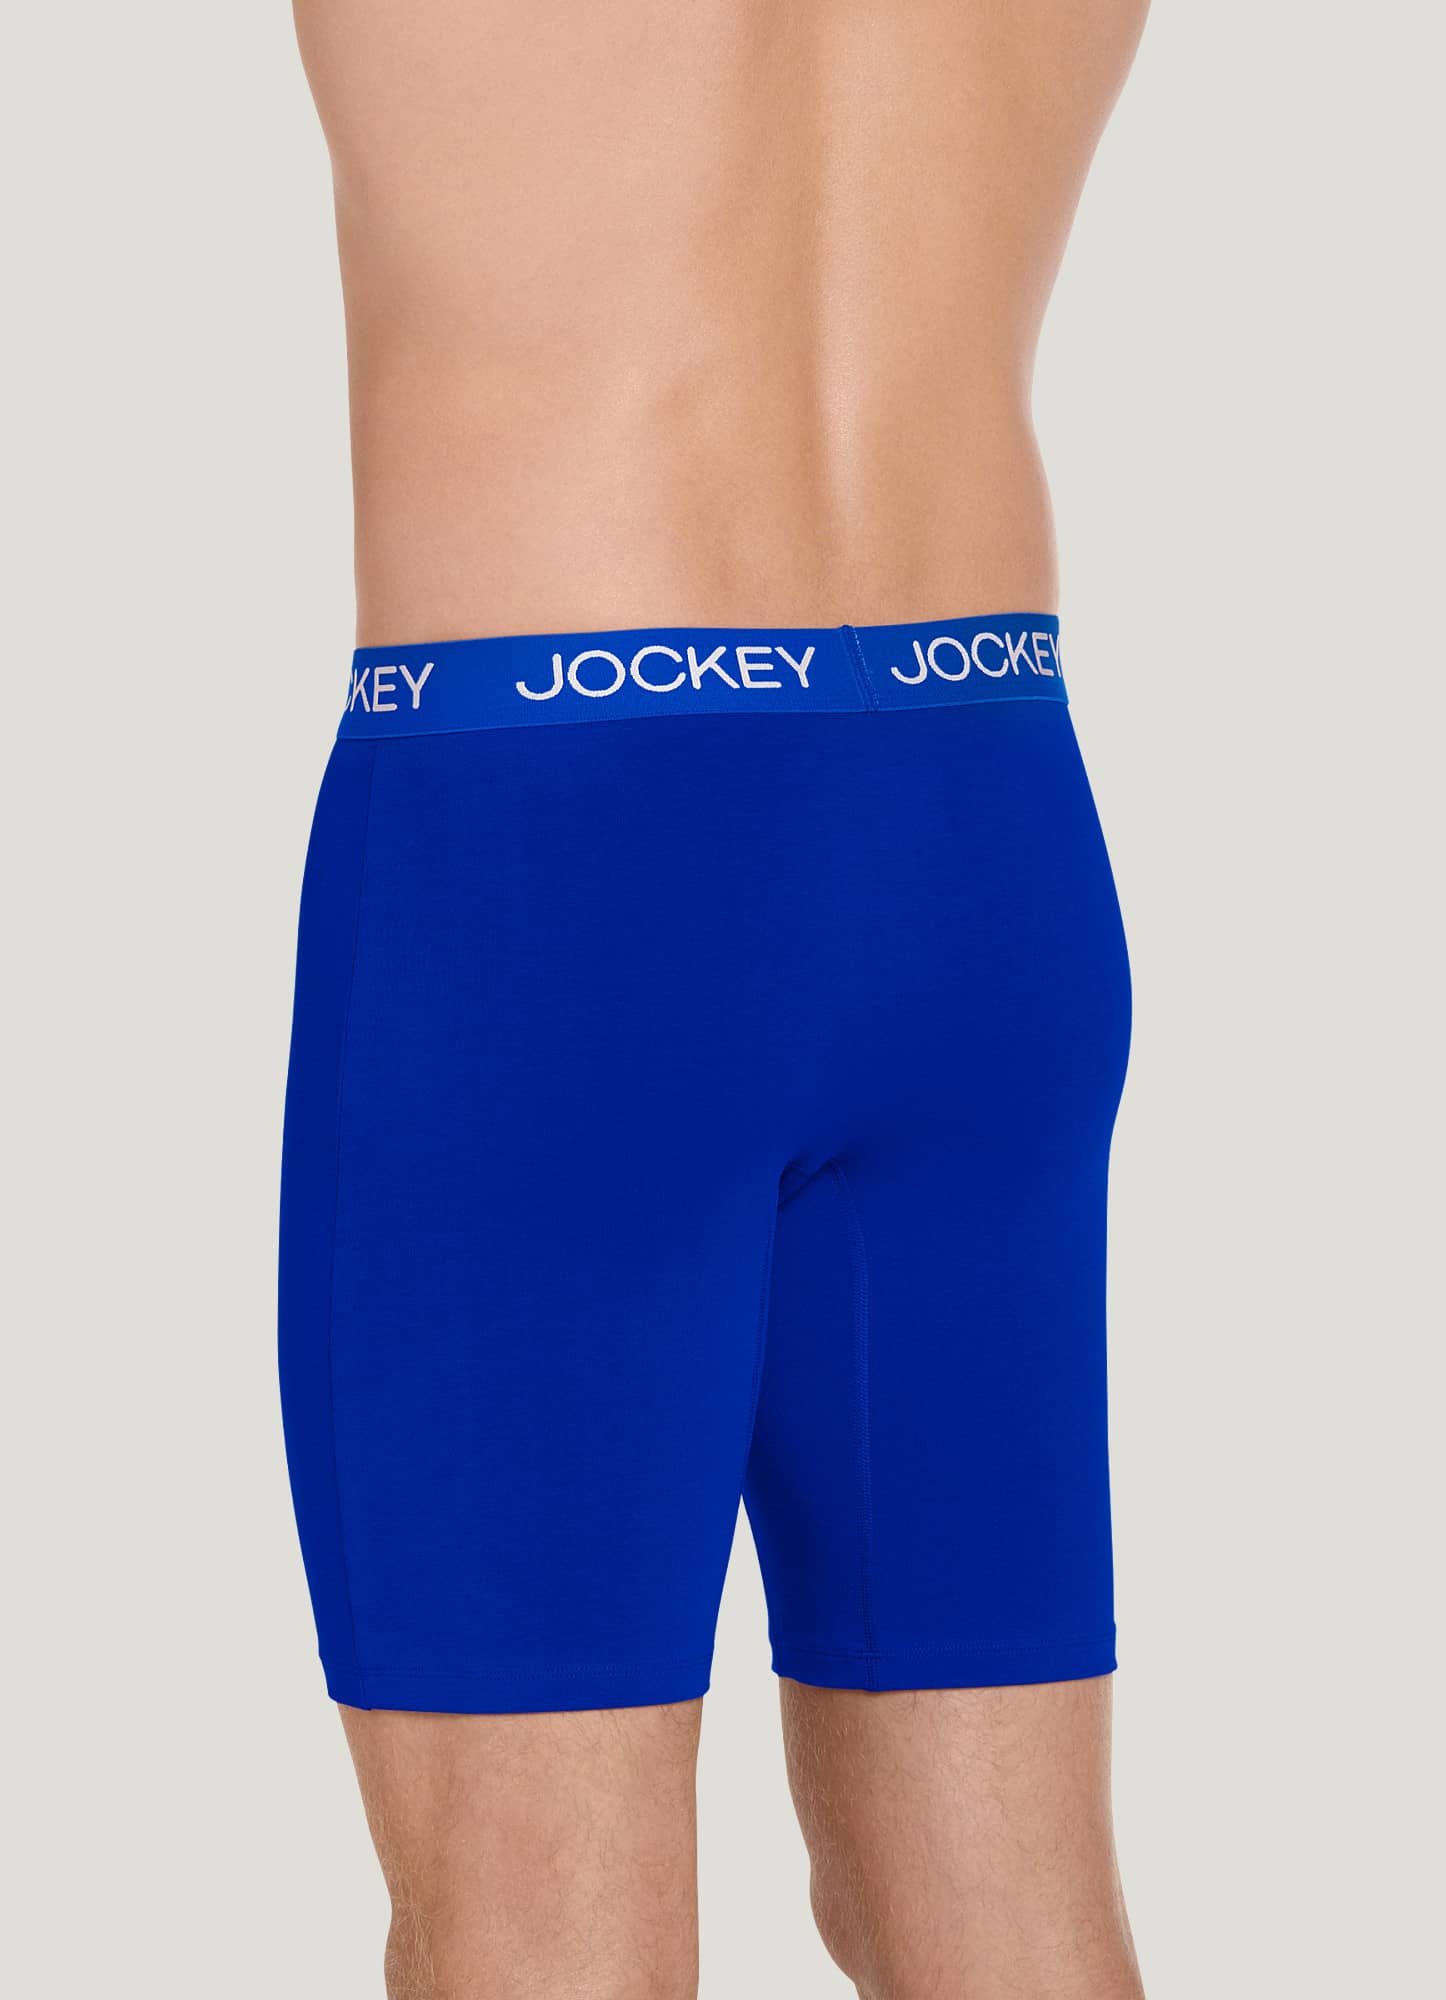 Tommy John Cool Cotton 4-inch Boxer Briefs in Blue for Men